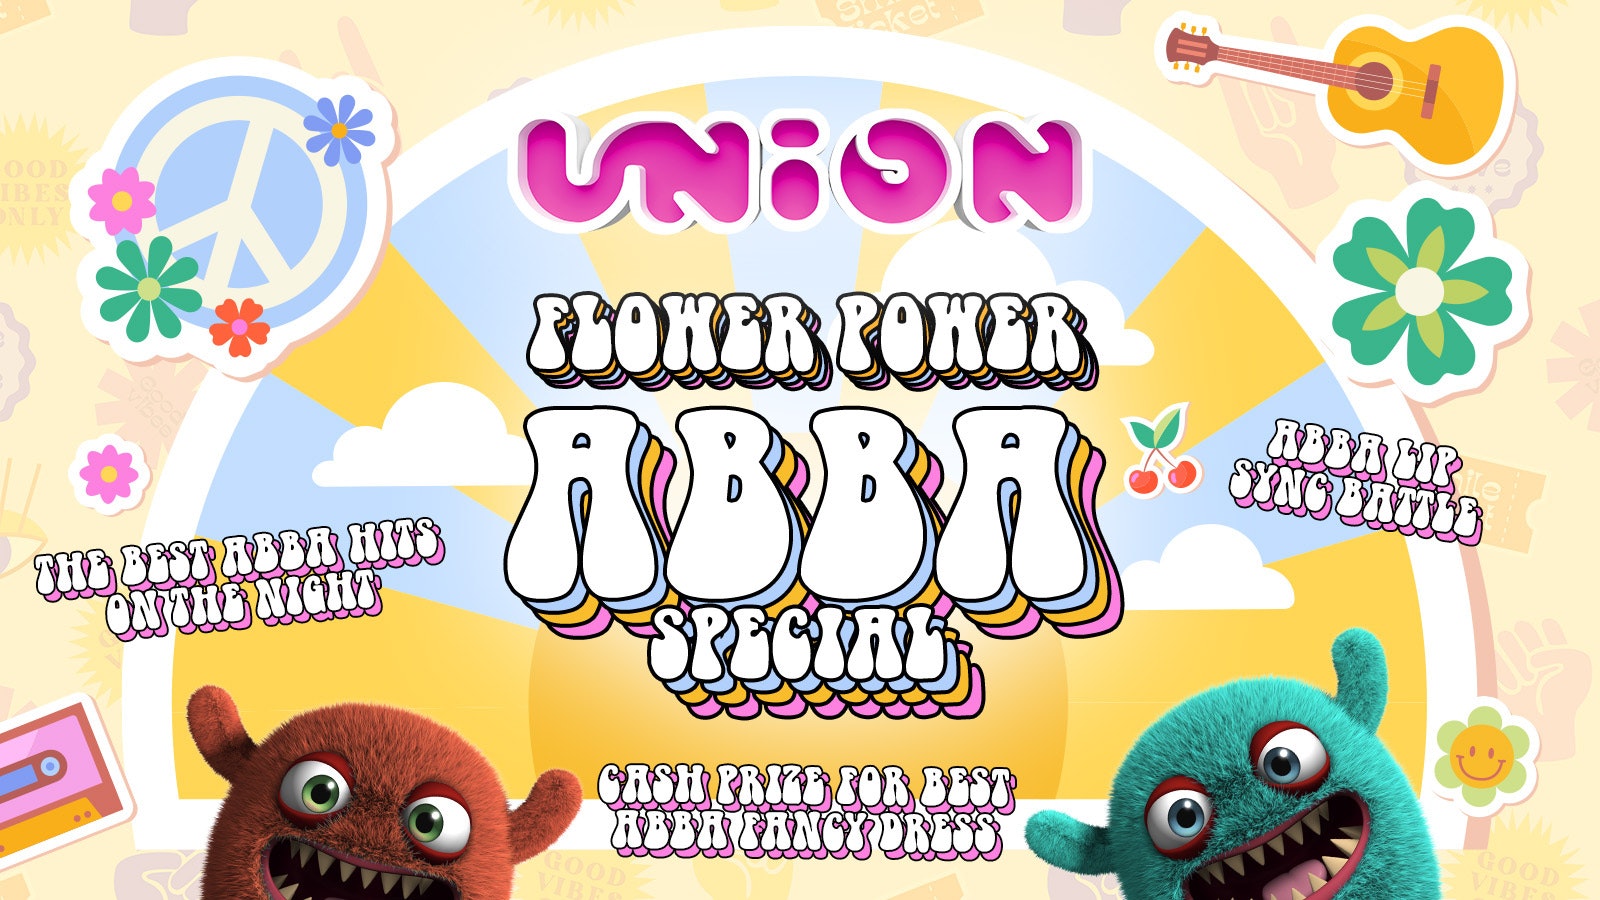 UNION TUESDAY’S PRESENTS FLOWER POWER ABBA SPECIAL